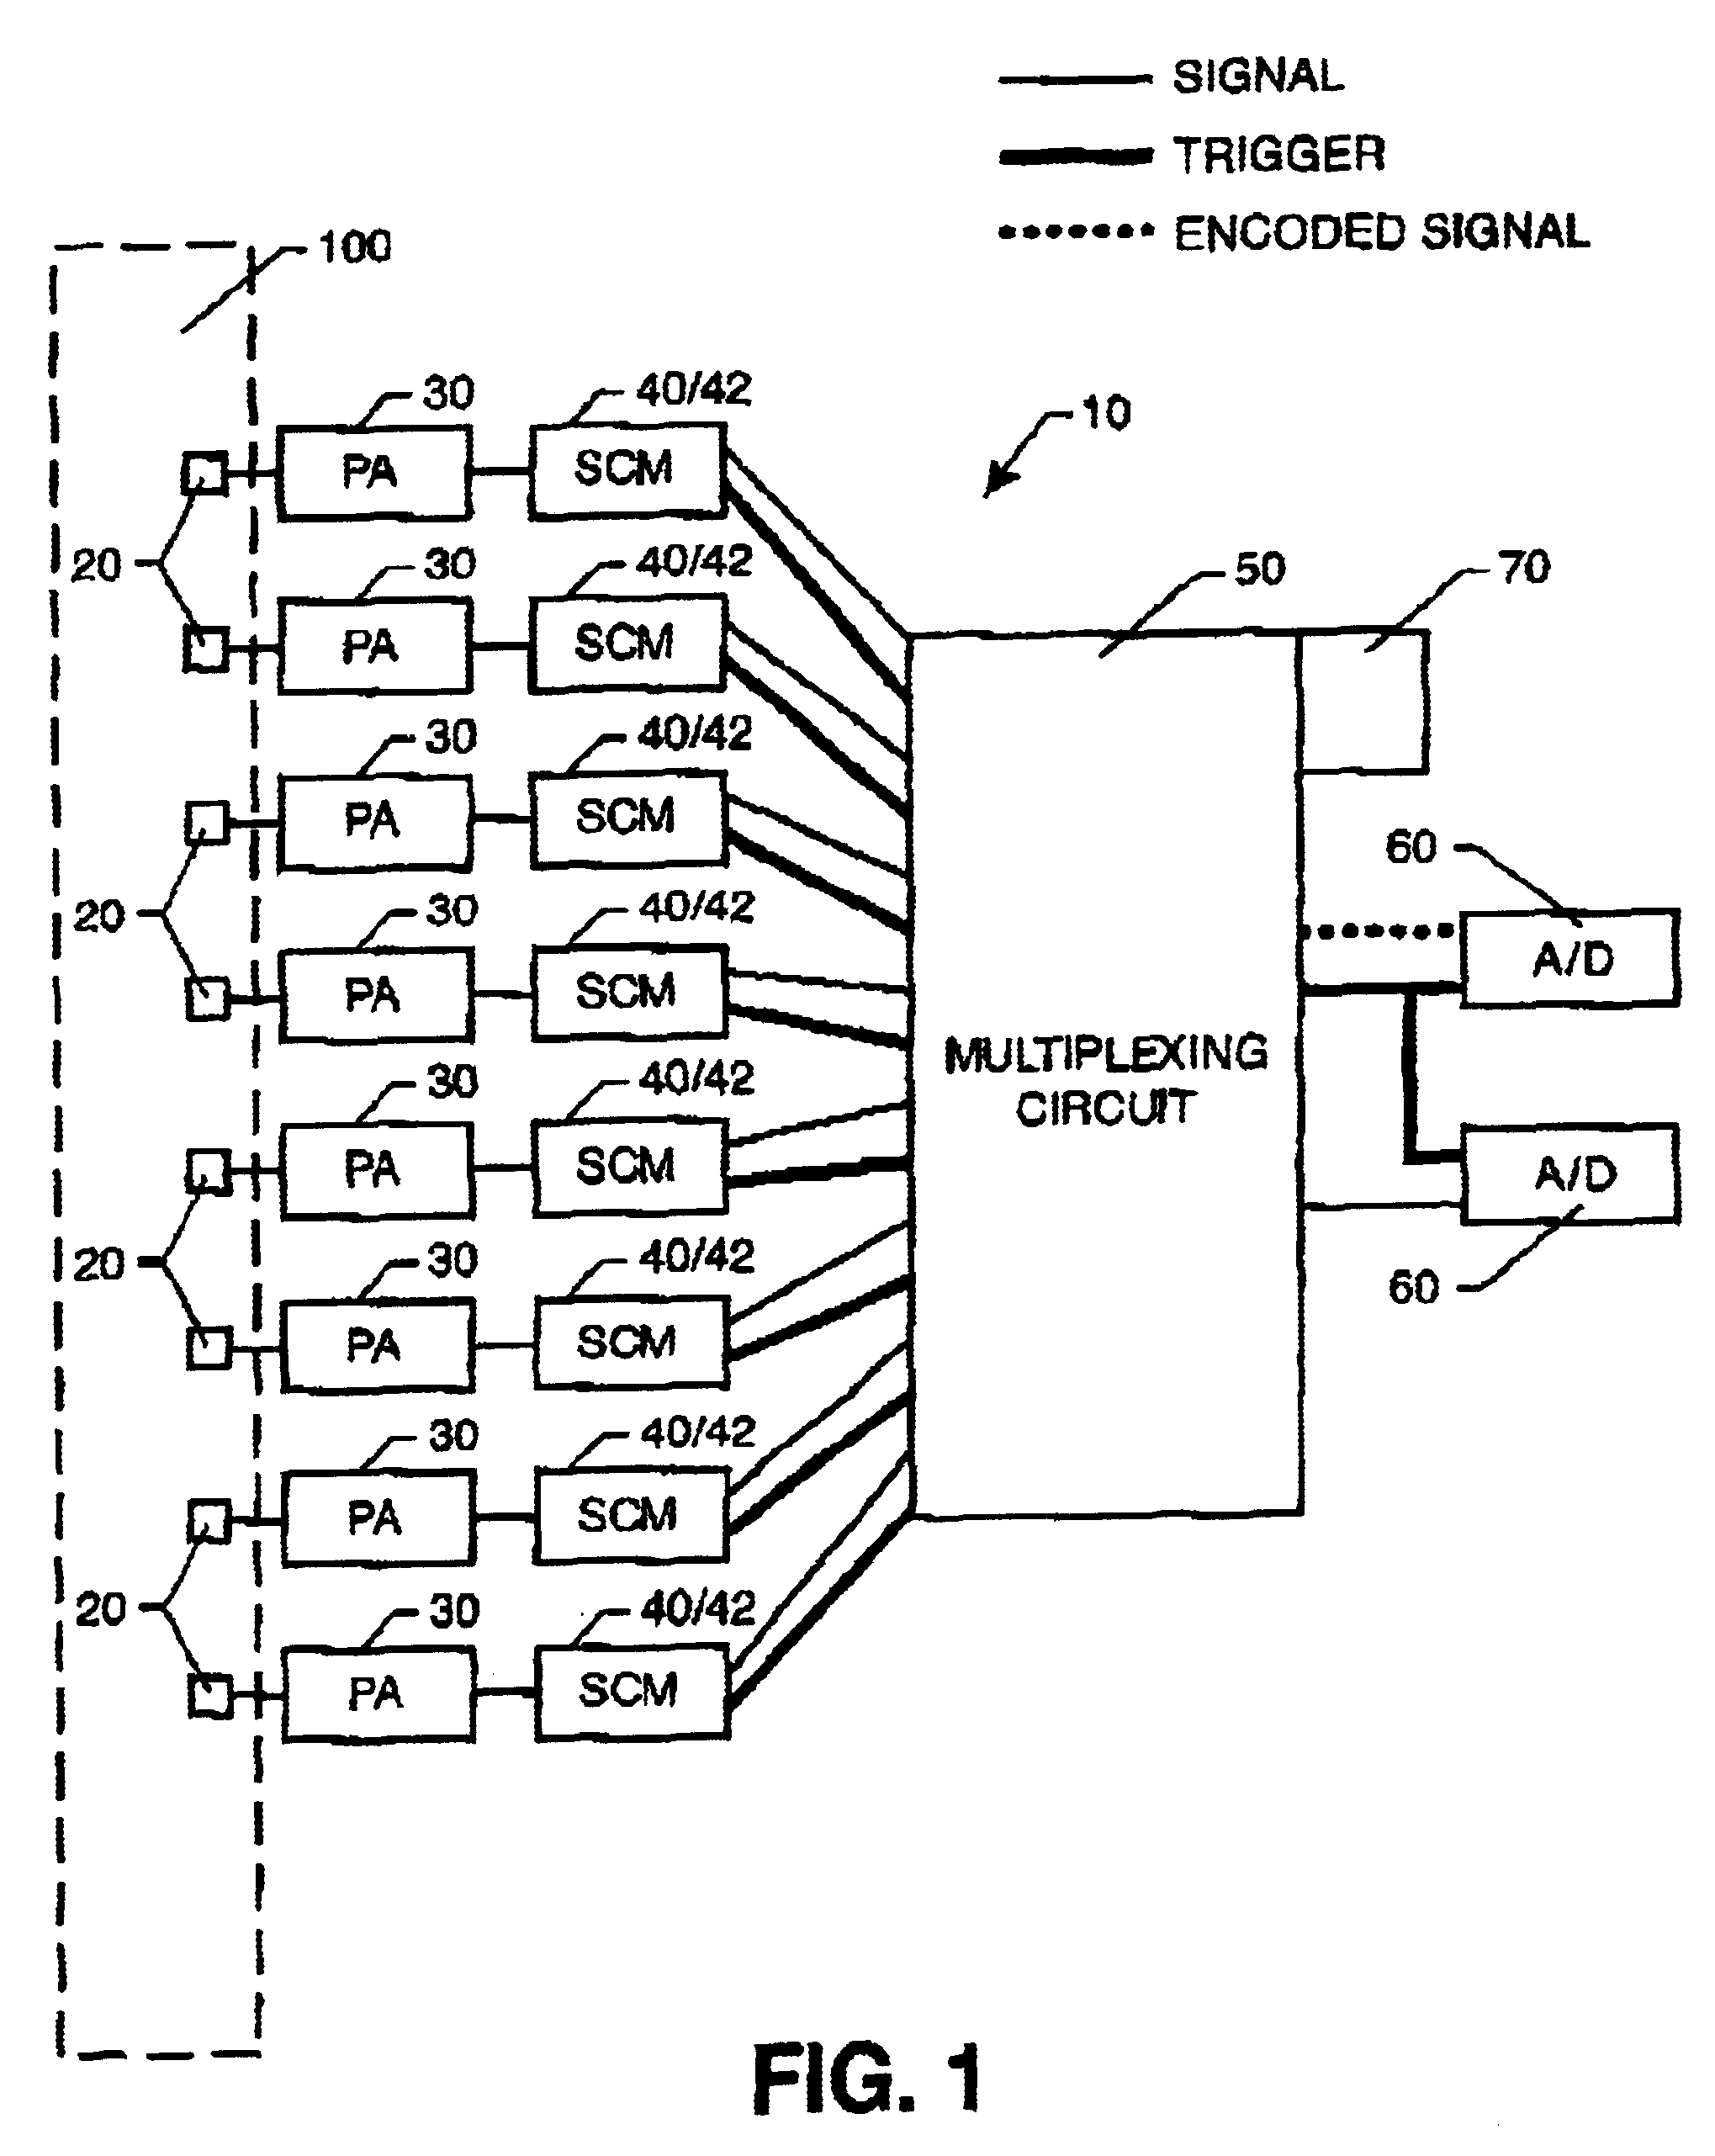 System for multiplexing acoustic emission (AE) instrumentation